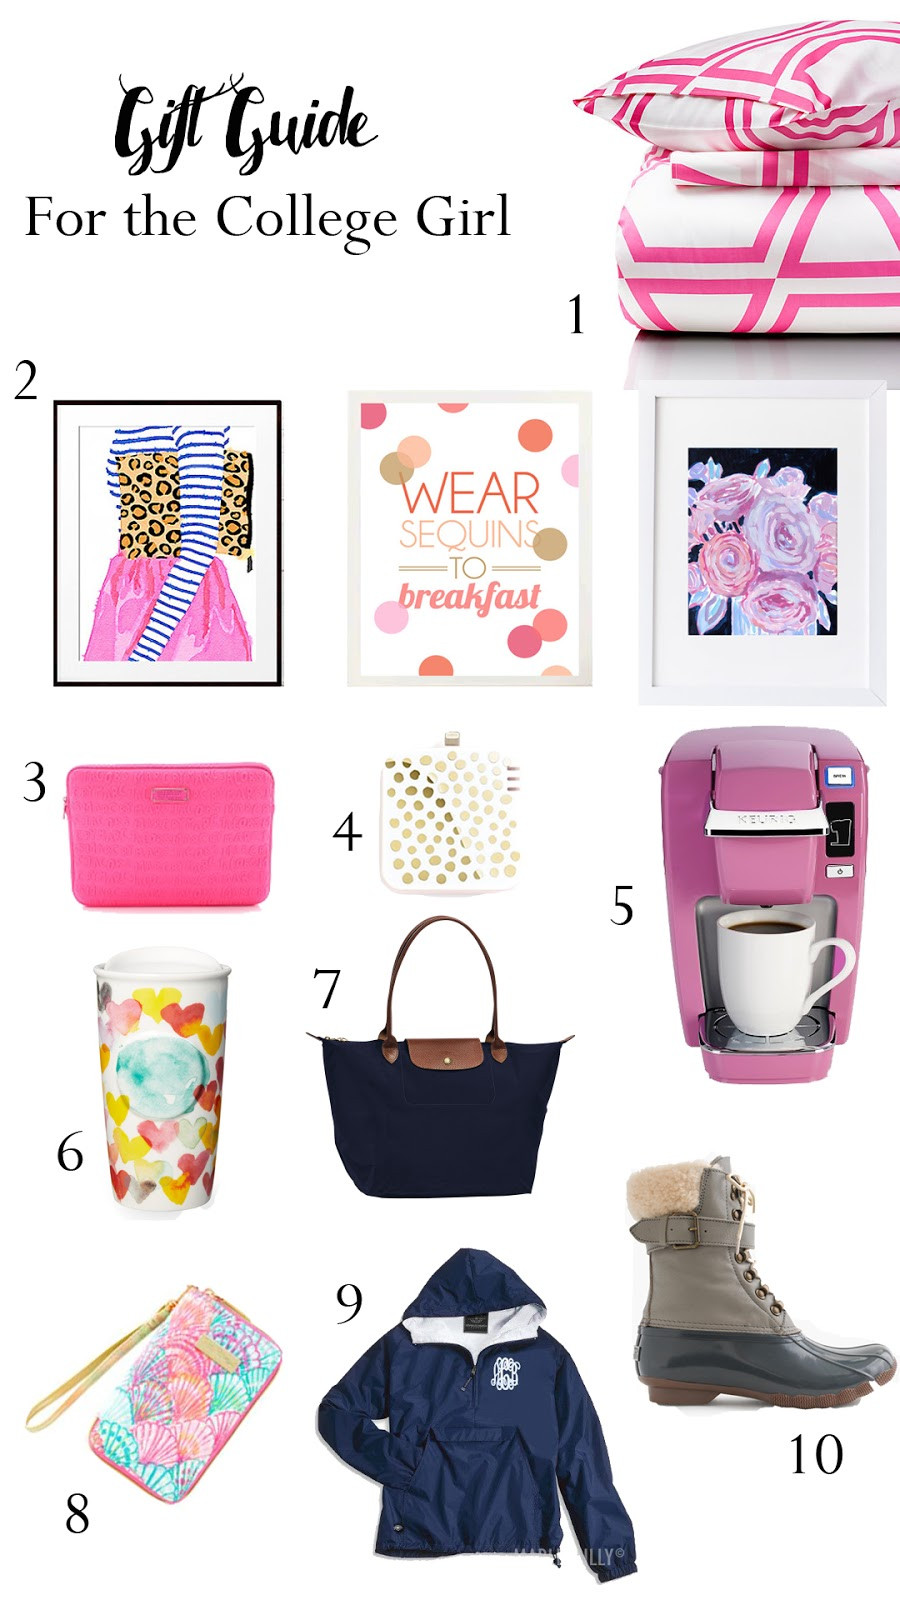 Christmas Gift Ideas For College Girl
 Gift Guide For the College Girl